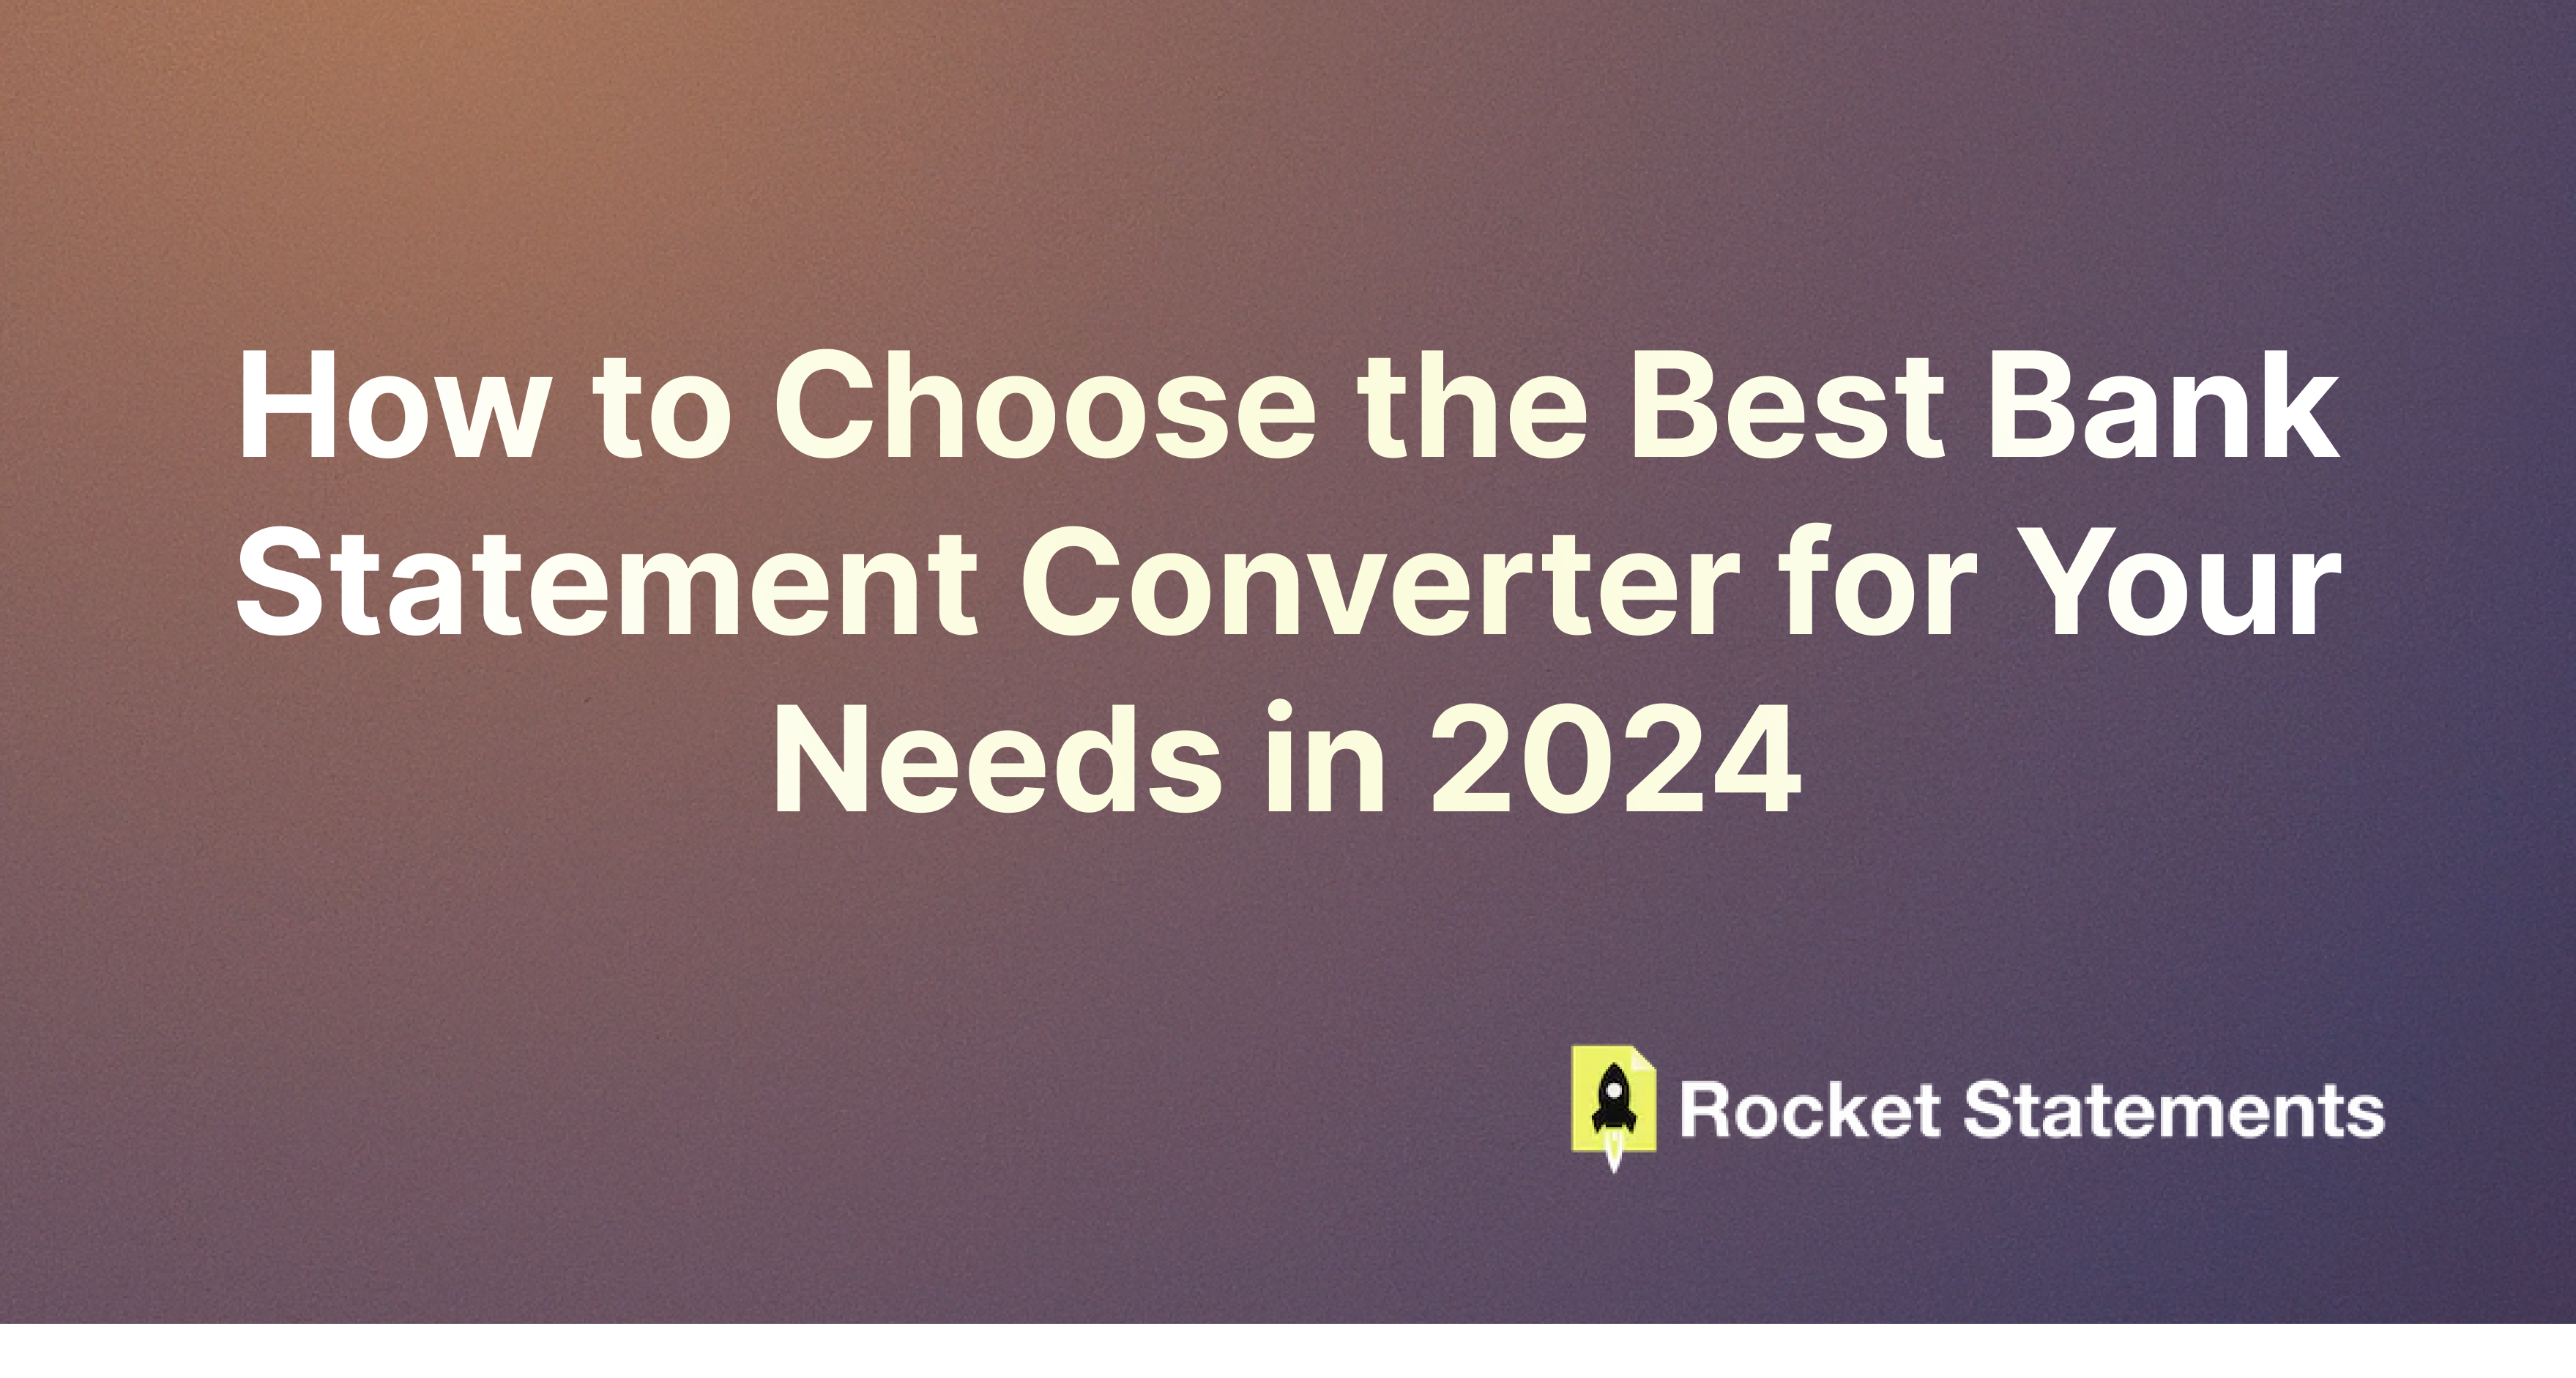 How to Choose the Best Bank Statement Converter for Your Needs in 2024